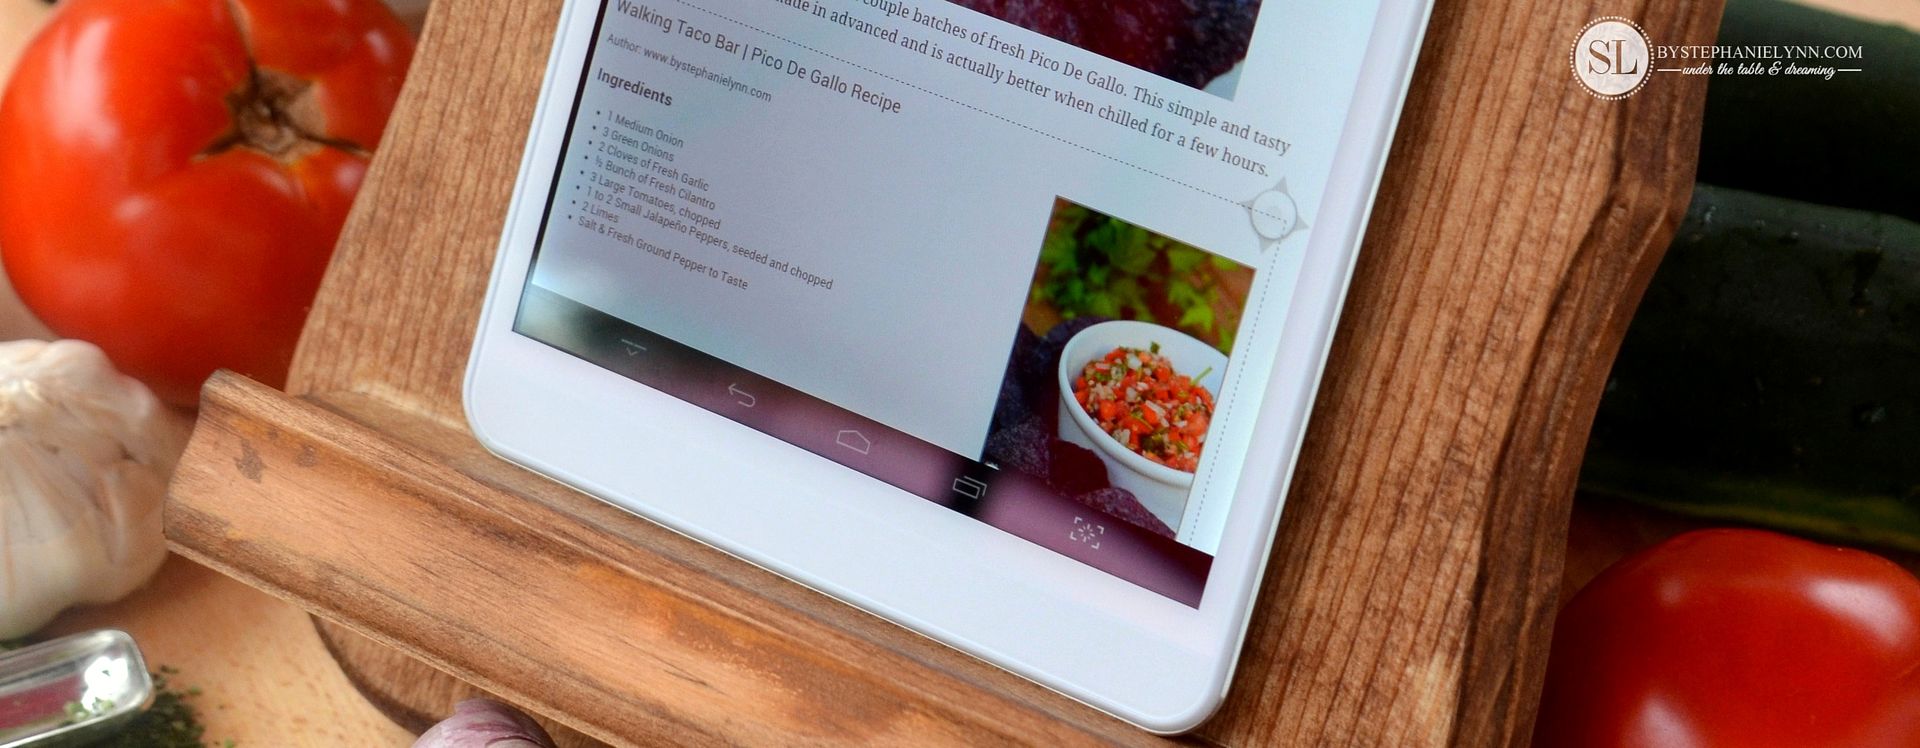 Meal Planning on the Go | with tmobile free data #tablettrio